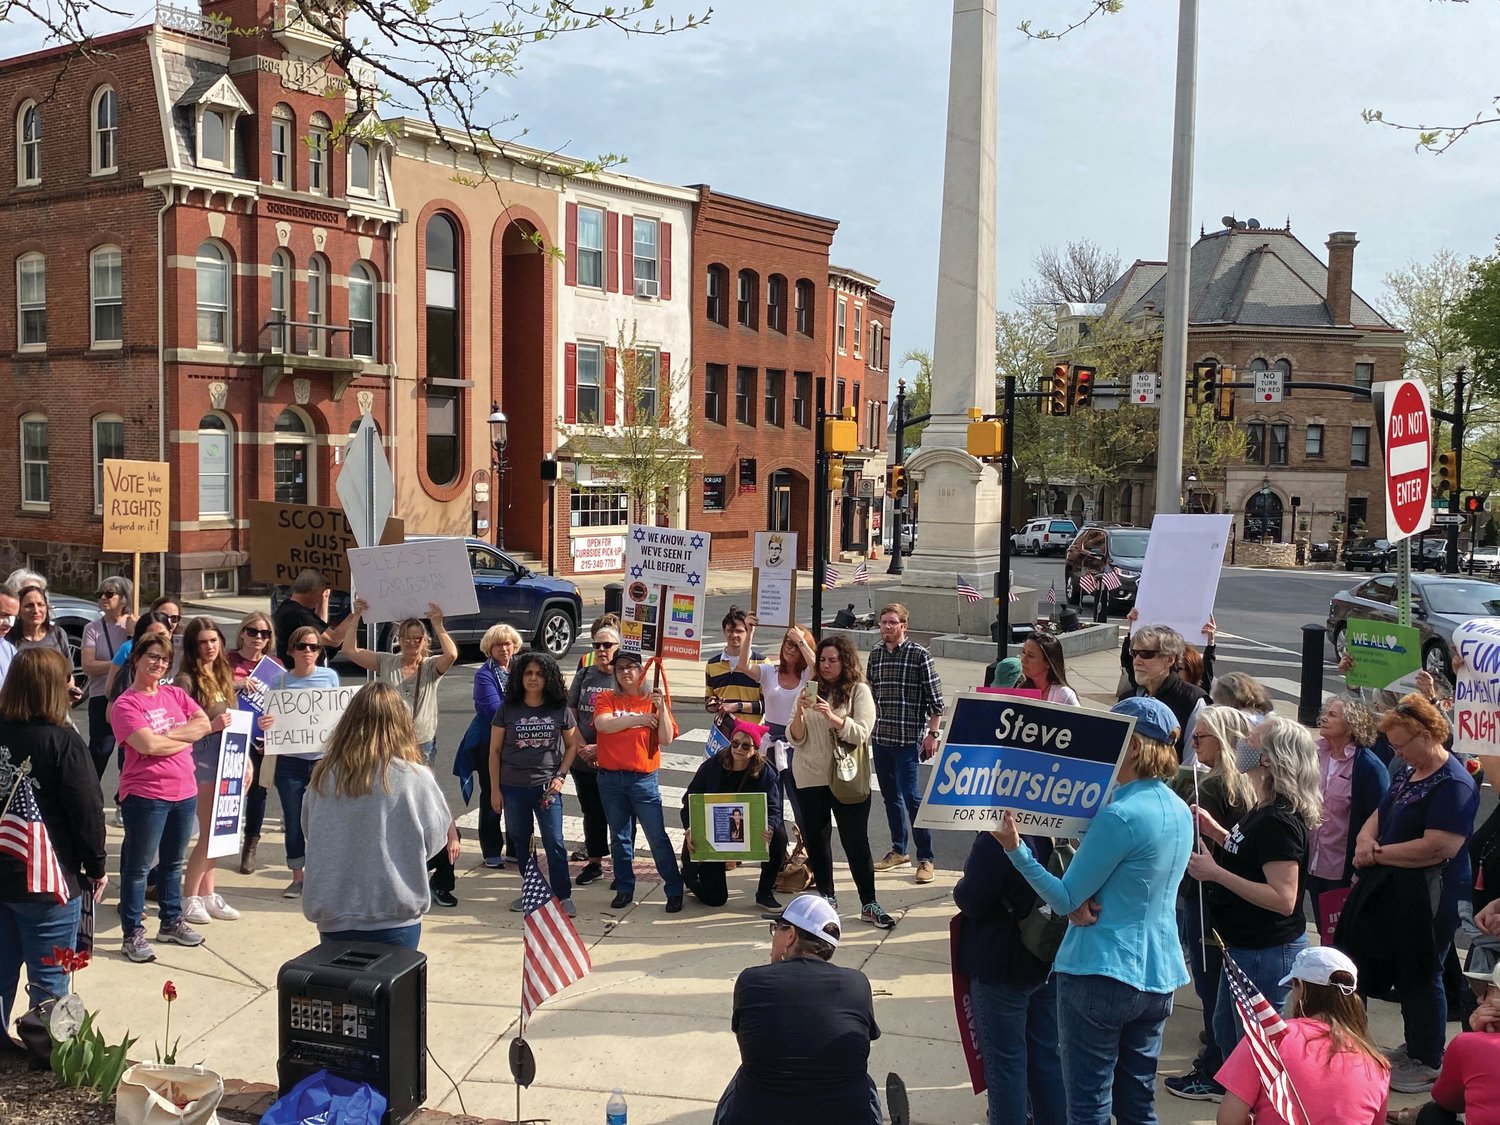 More than 100 people gather outside the former Bucks County Courthouse in Doylestown to call for reproductive rights in the wake of a leaked Supreme Court document sating Roe v. Wade should be overturned.